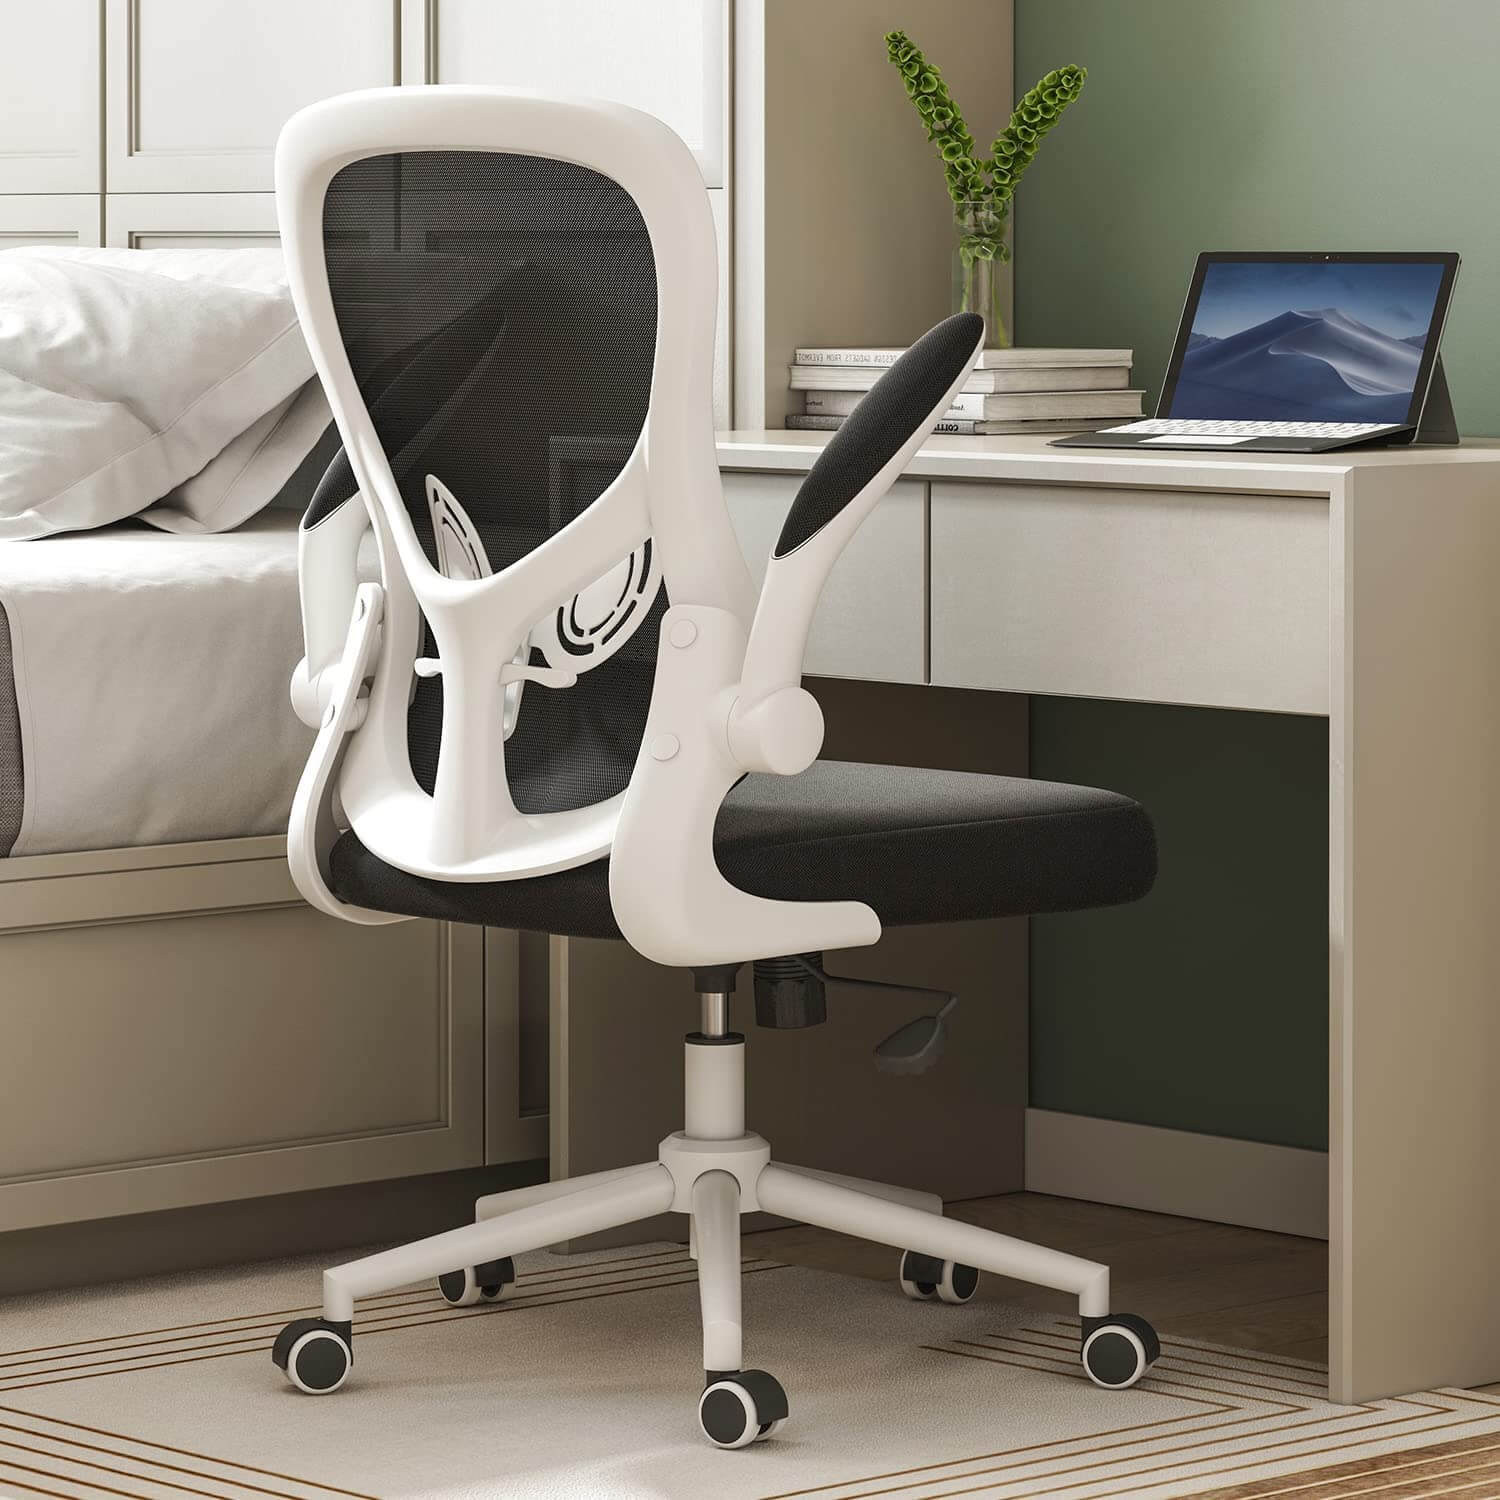 Hbada Office Chair Ergonomic Desk Chair Computer Mesh Chair With Lumbar Support And Flip Up ArmsWhite 